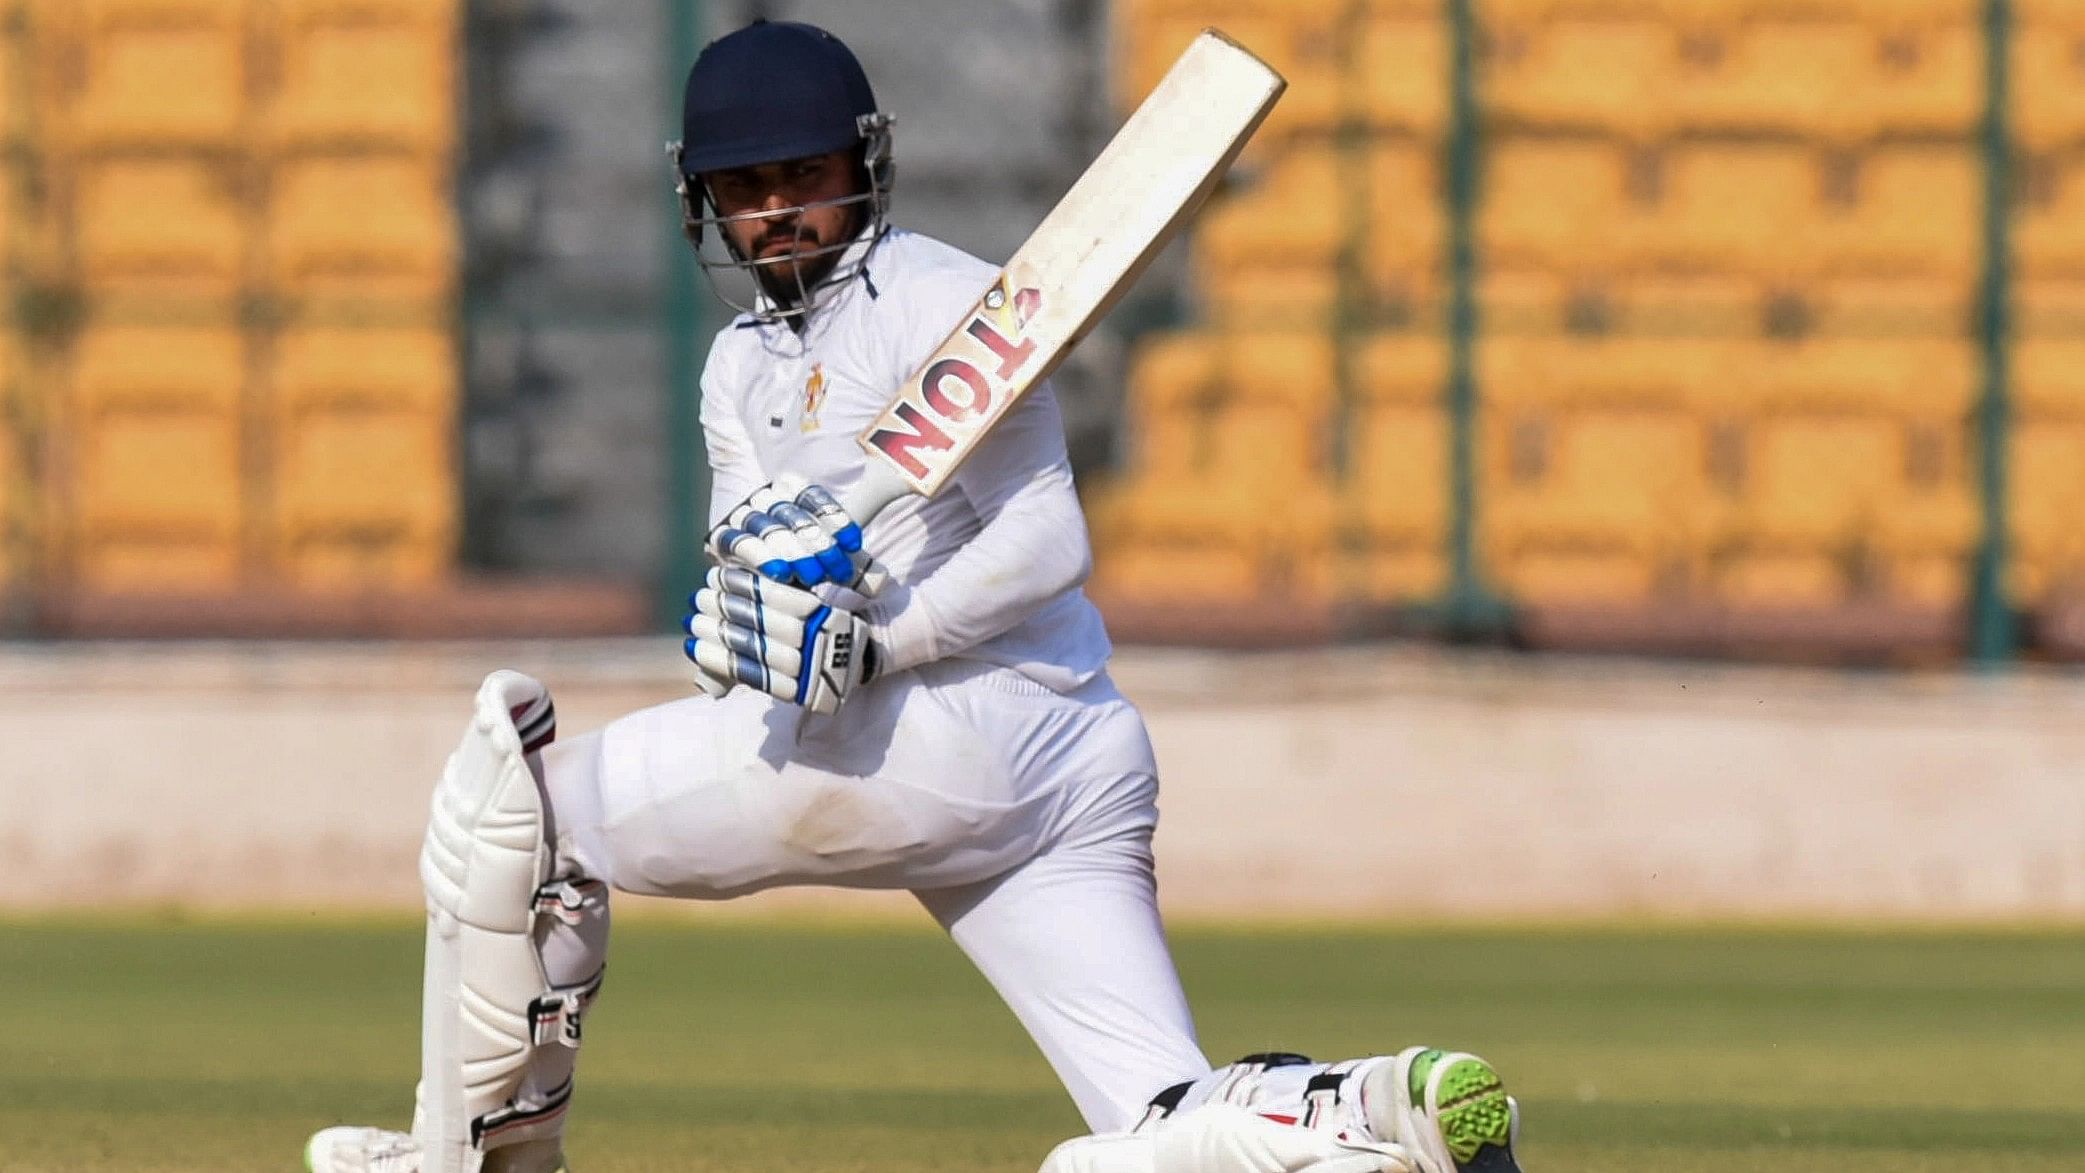 <div class="paragraphs"><p>After missing the game against Tripura, senior batter Manish Pandey will return to boost Karnataka batting when they take on Railways in Surat from today. </p></div>